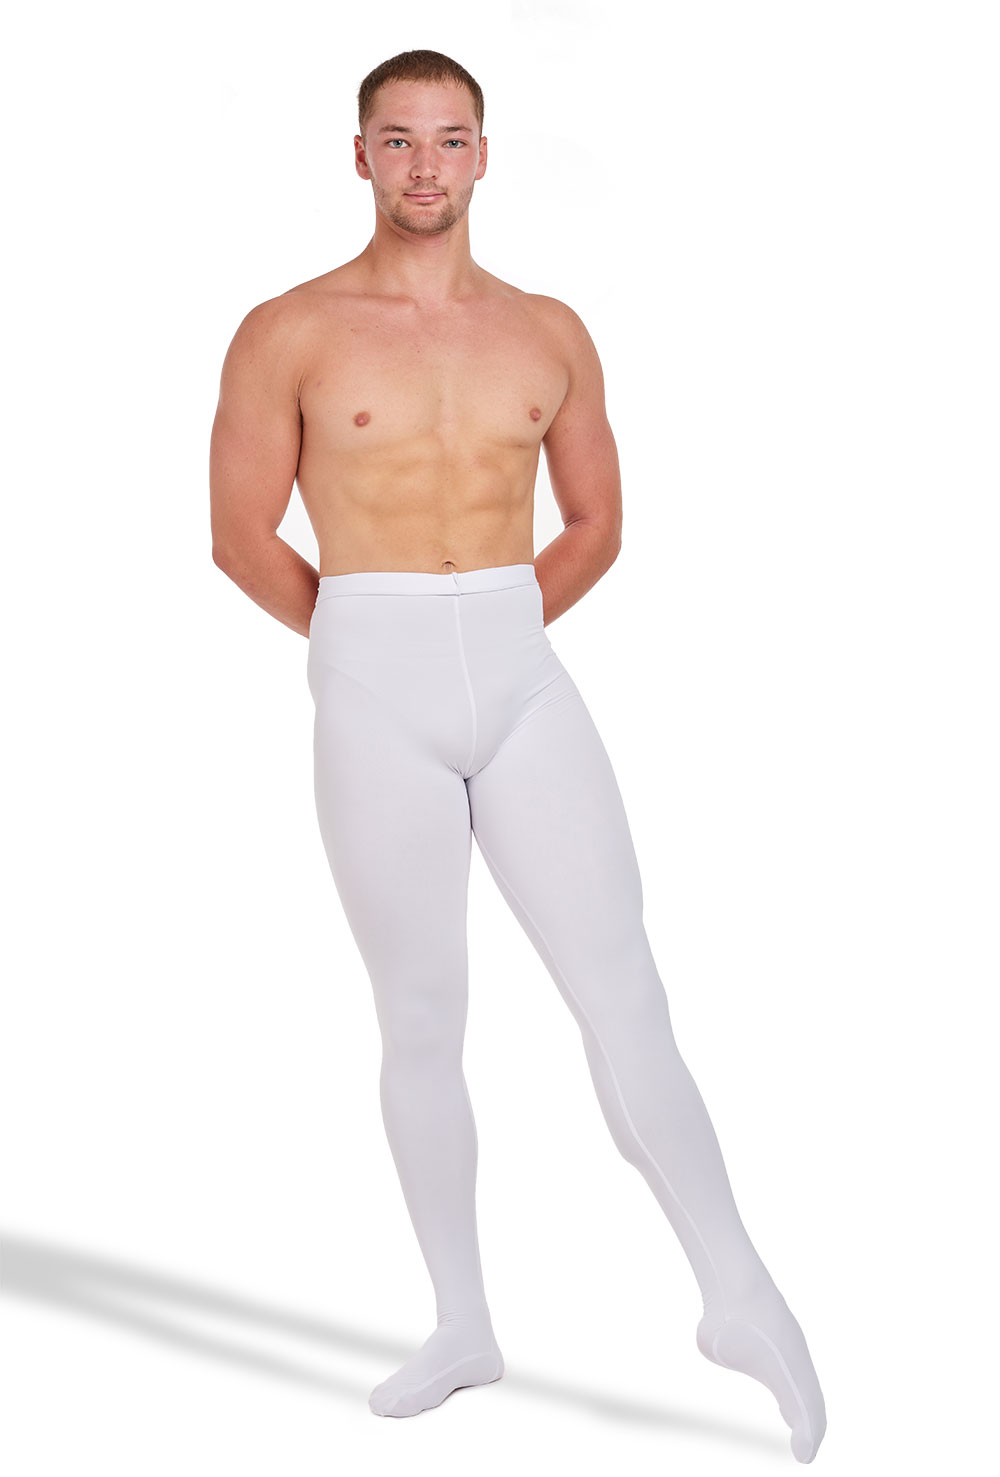 angelique tissot recommends Ballet Guys In Tights